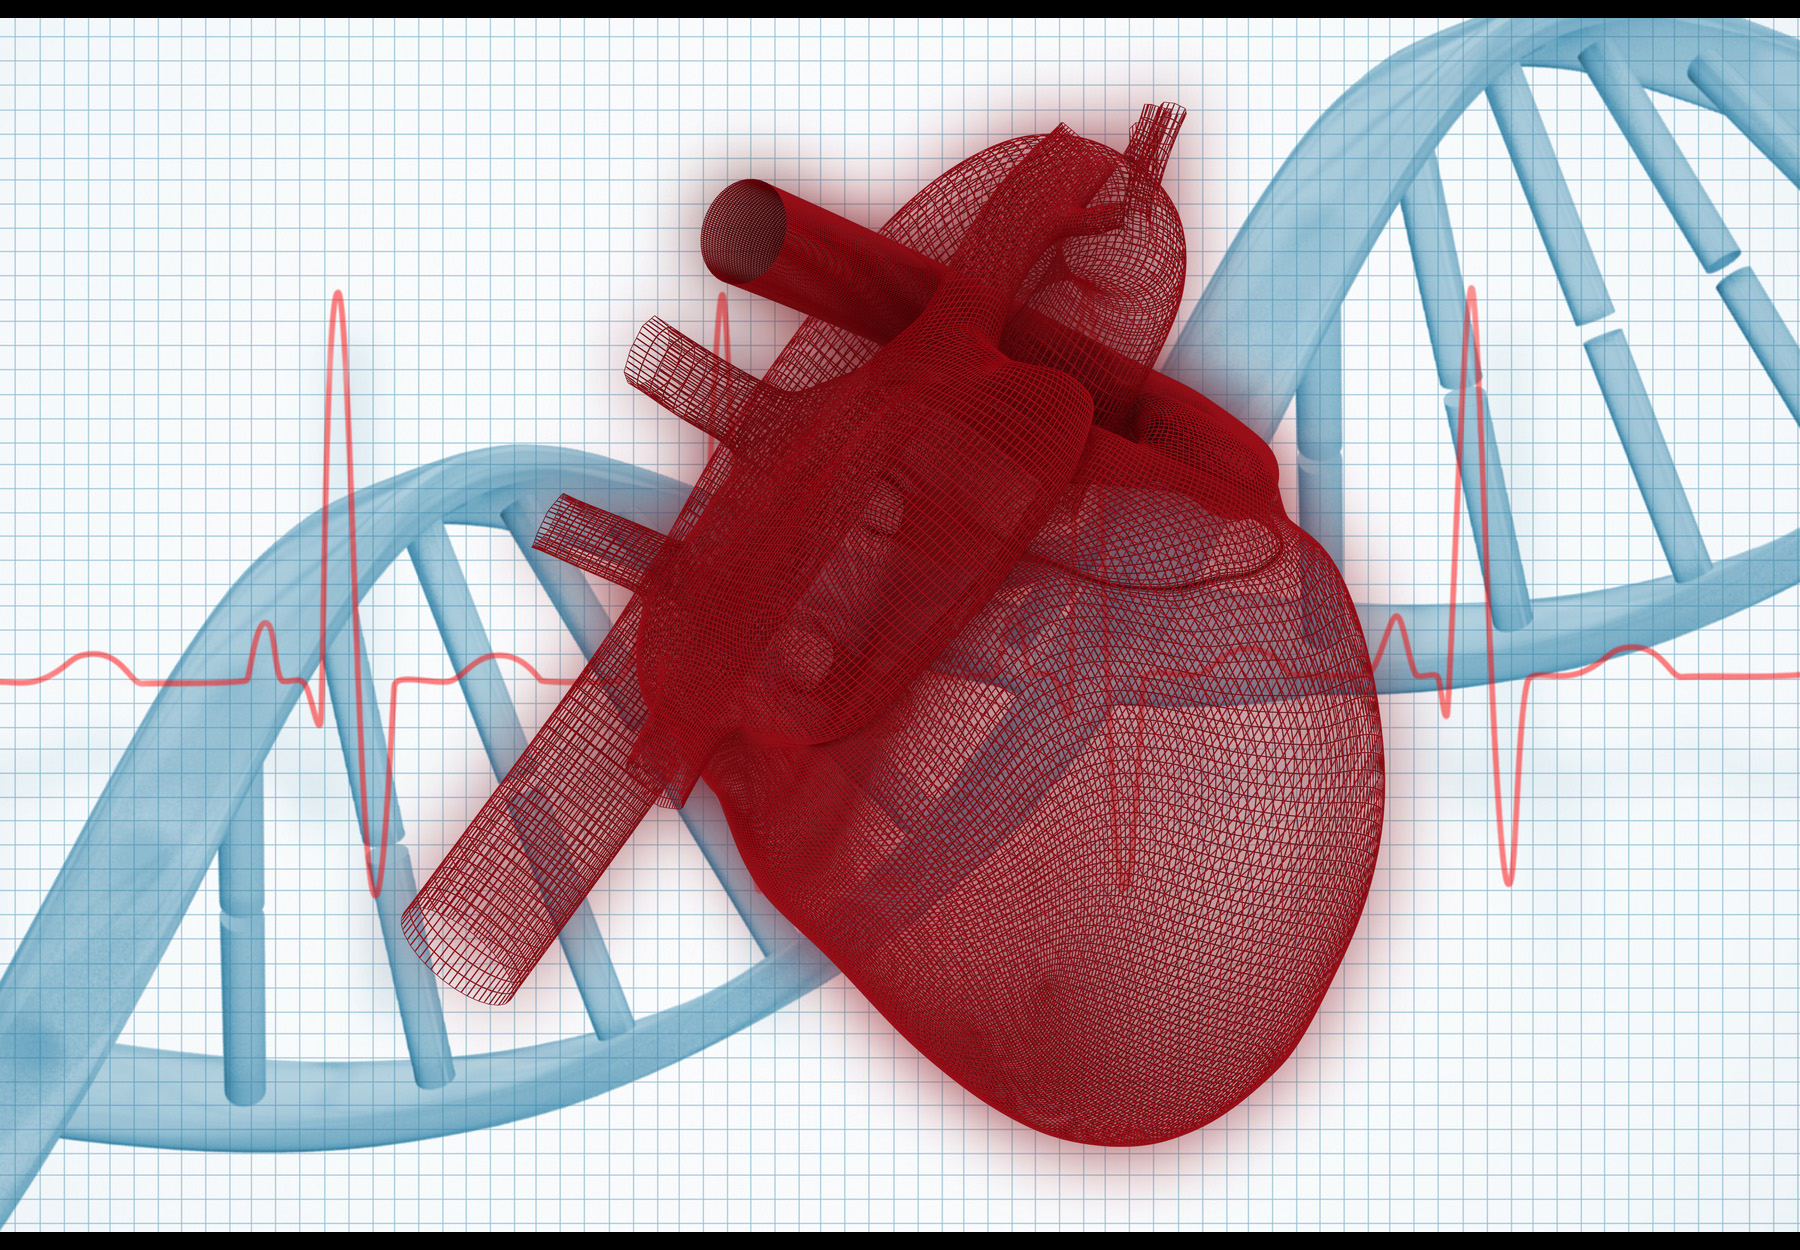 Red diagram of heart with blue DNA strand in background. Cardiac genetic testing concept. Stock image.